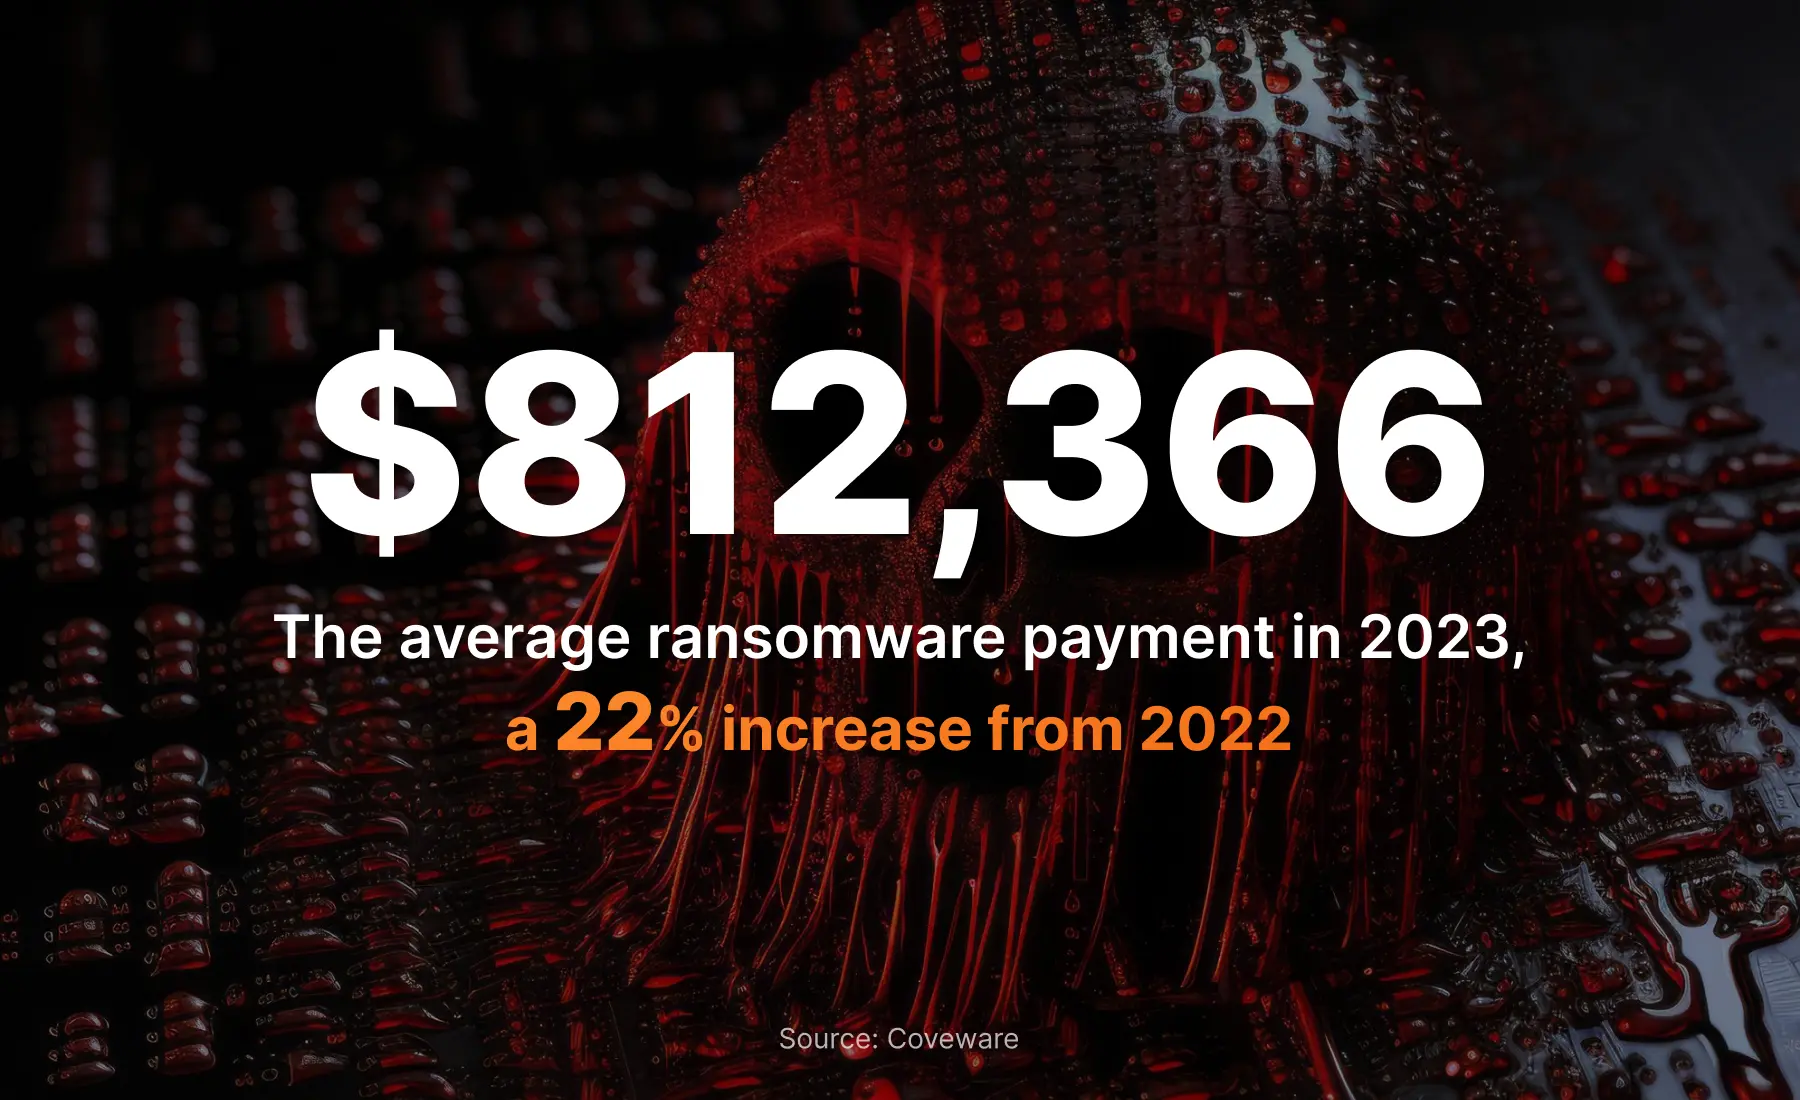 The average ransomware payment in 2023